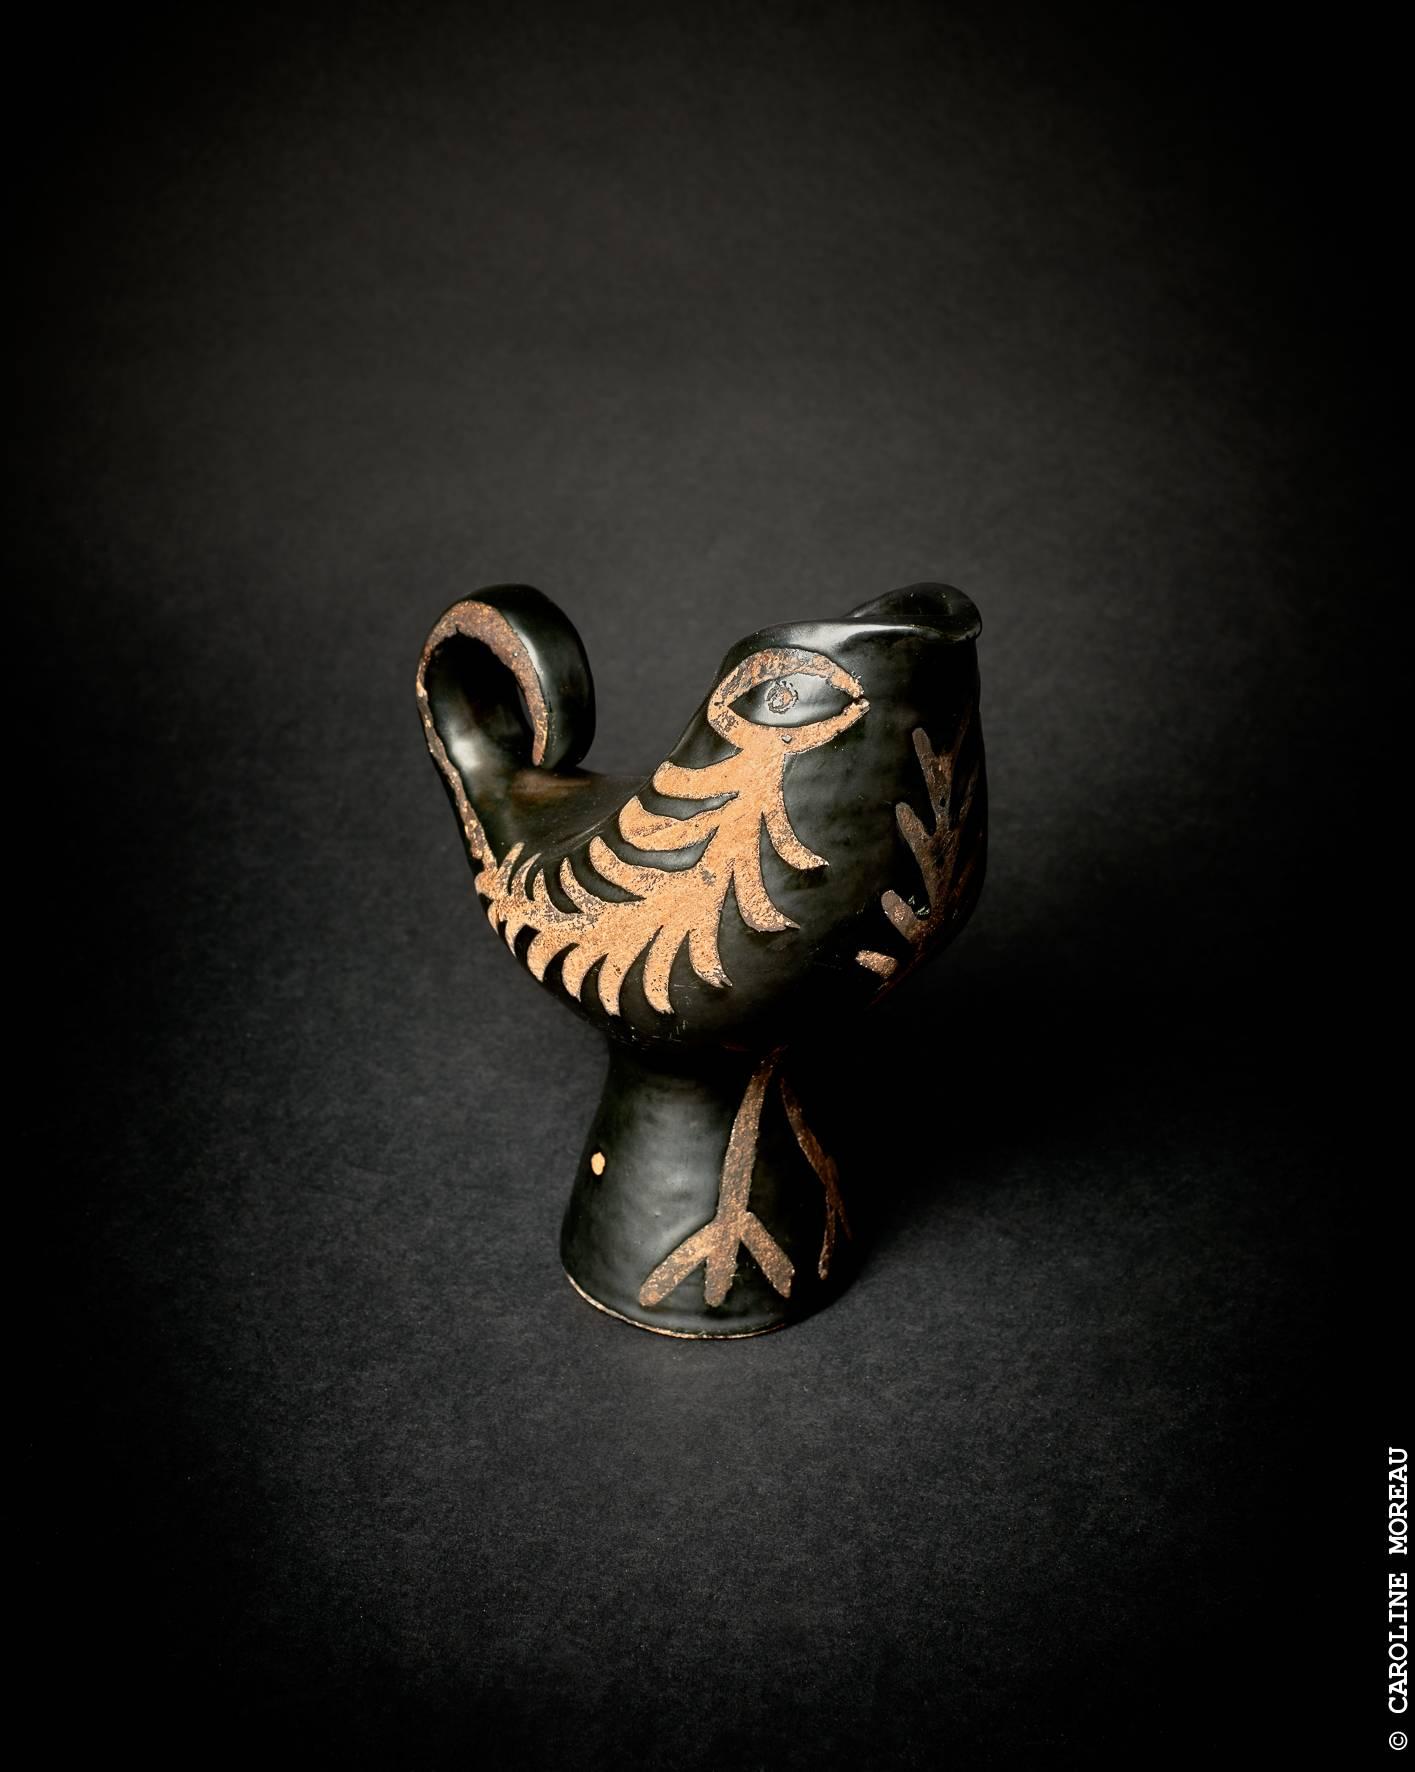 Black enameled earthenware famous Bird Pitcher by Roger Capron.